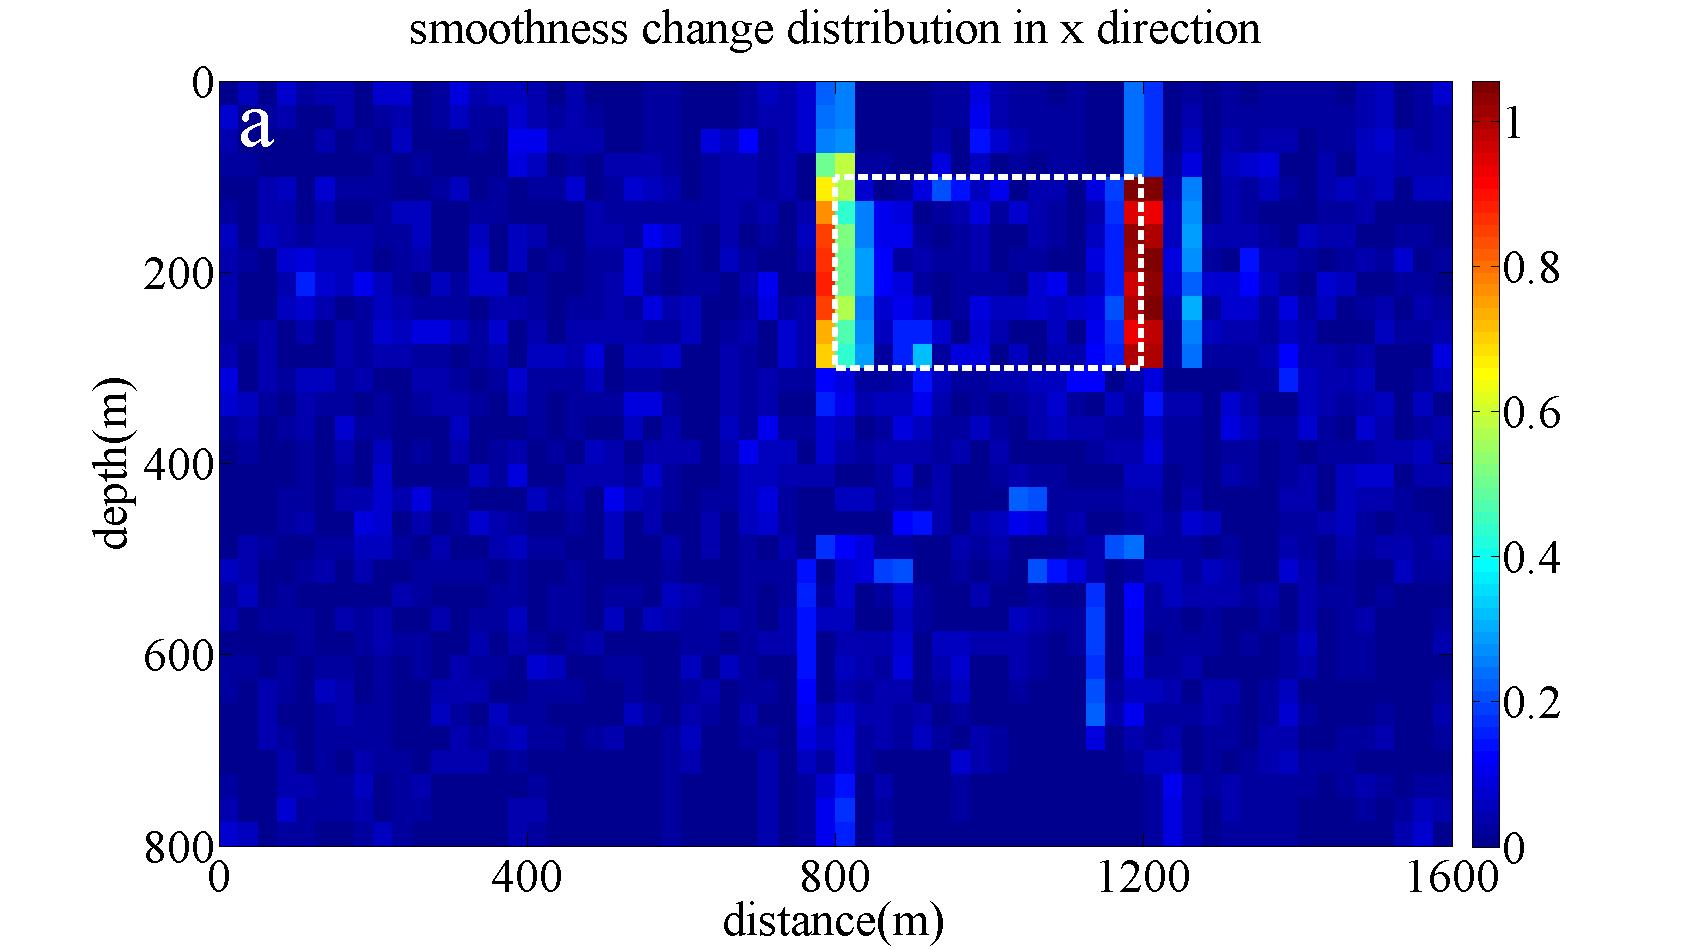 Fig 2_2 shows there exist two regions of high change in smoothness in the x direction corresponding to the vertical boundaries of the blocky anomaly.